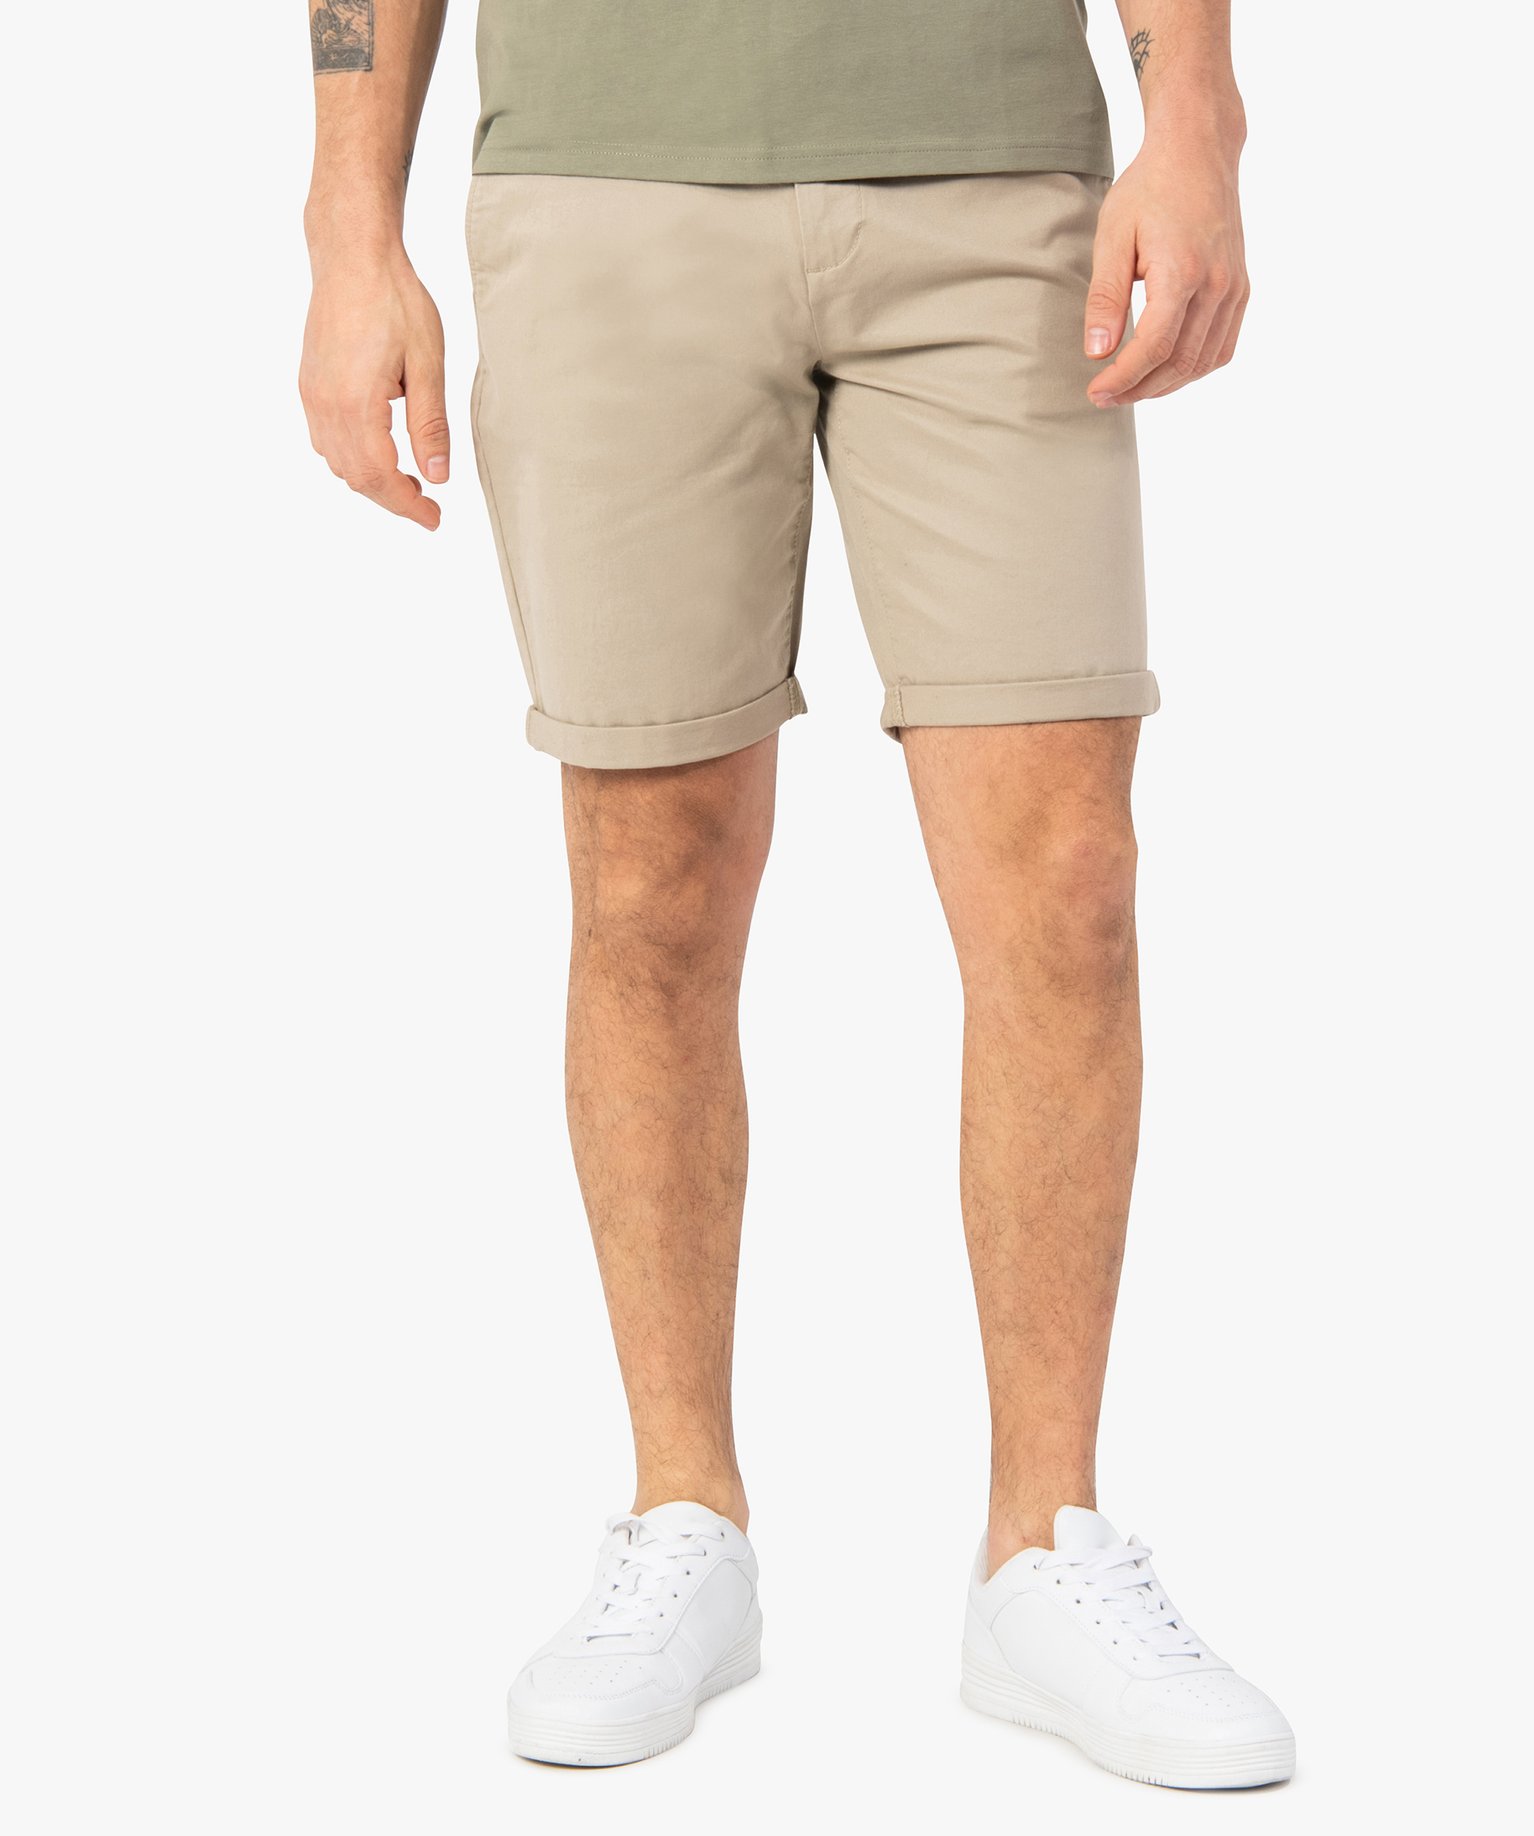 bermuda homme en toile extensible 5 poches coupe chino beige